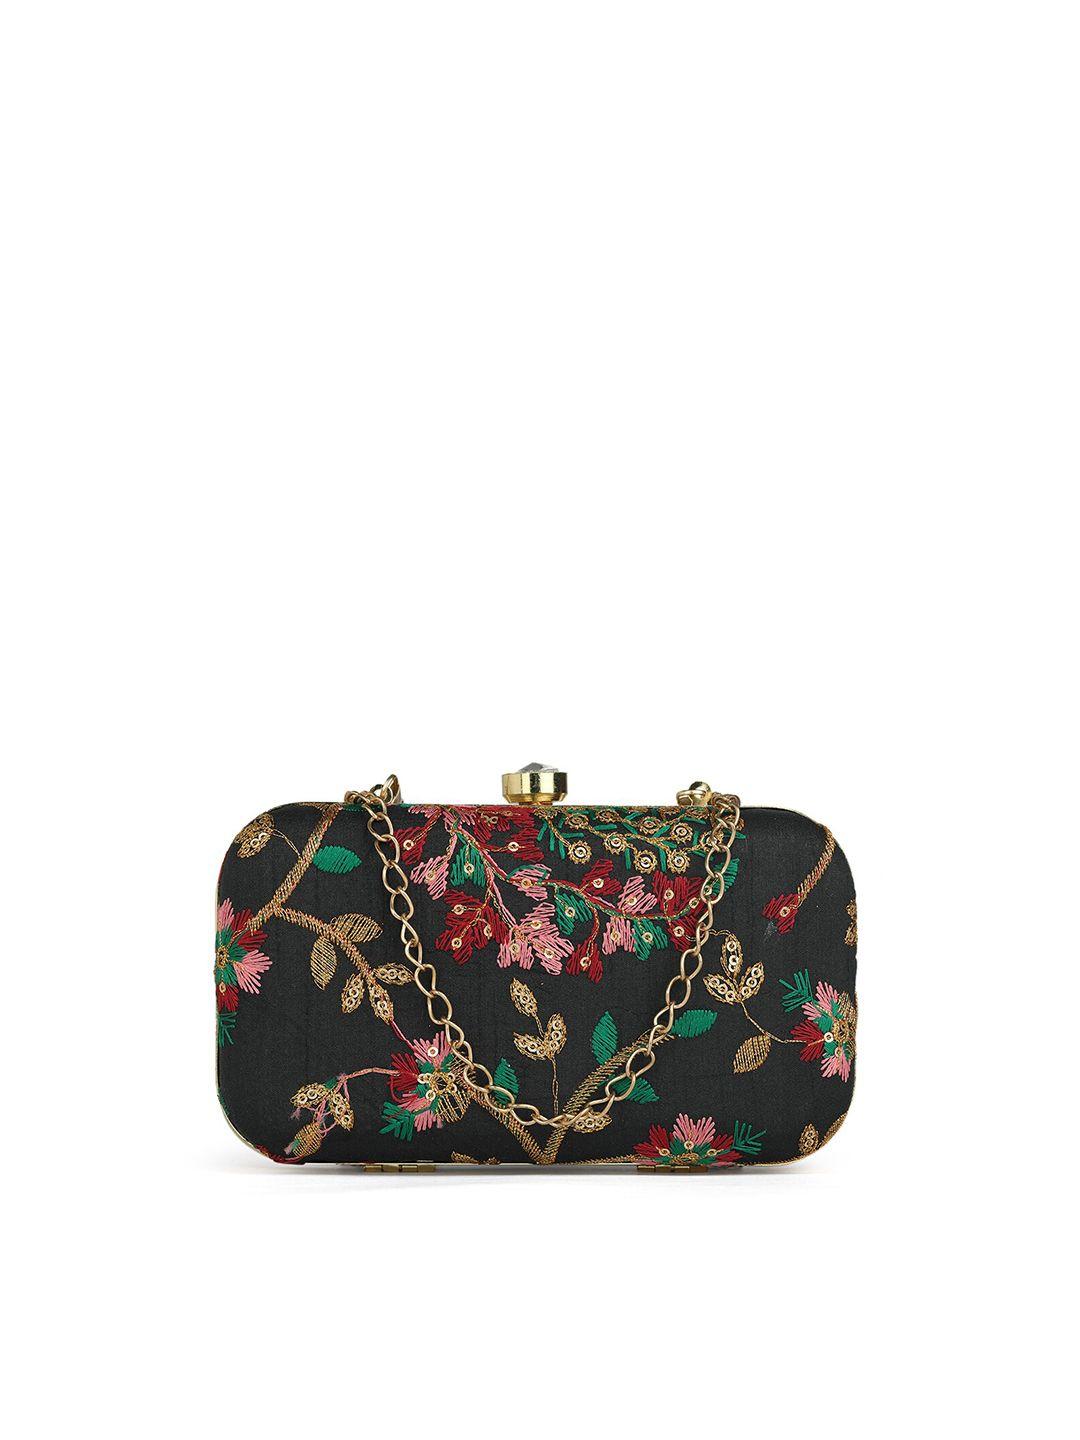 gaura pakhi black & red embroidered box clutch